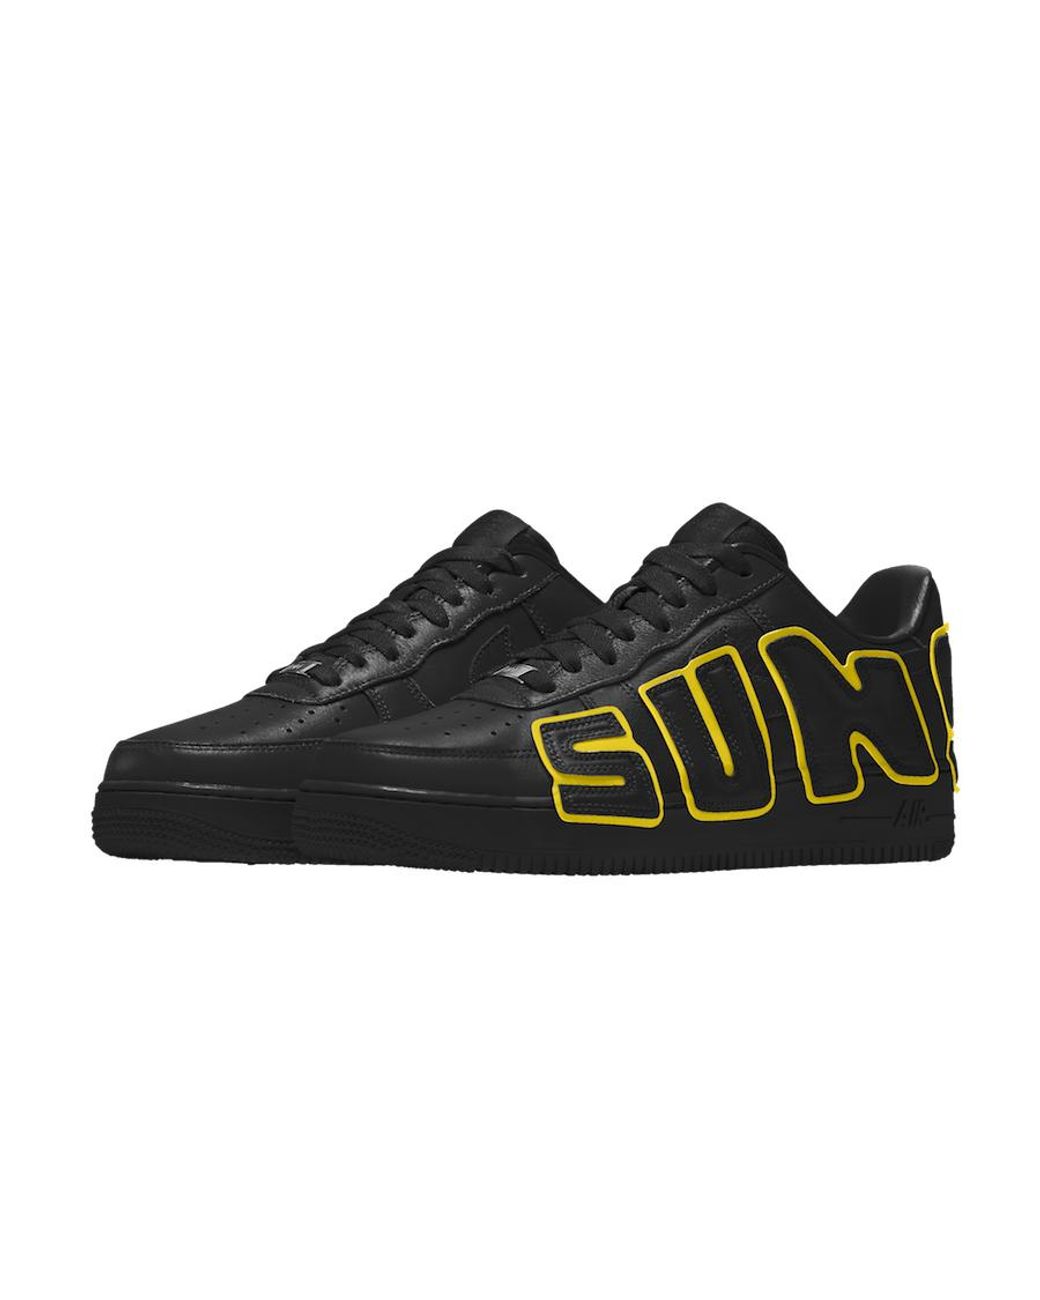 Nike Air Force 1 Low X Cpfm Sunshine Yellow in Black | Lyst